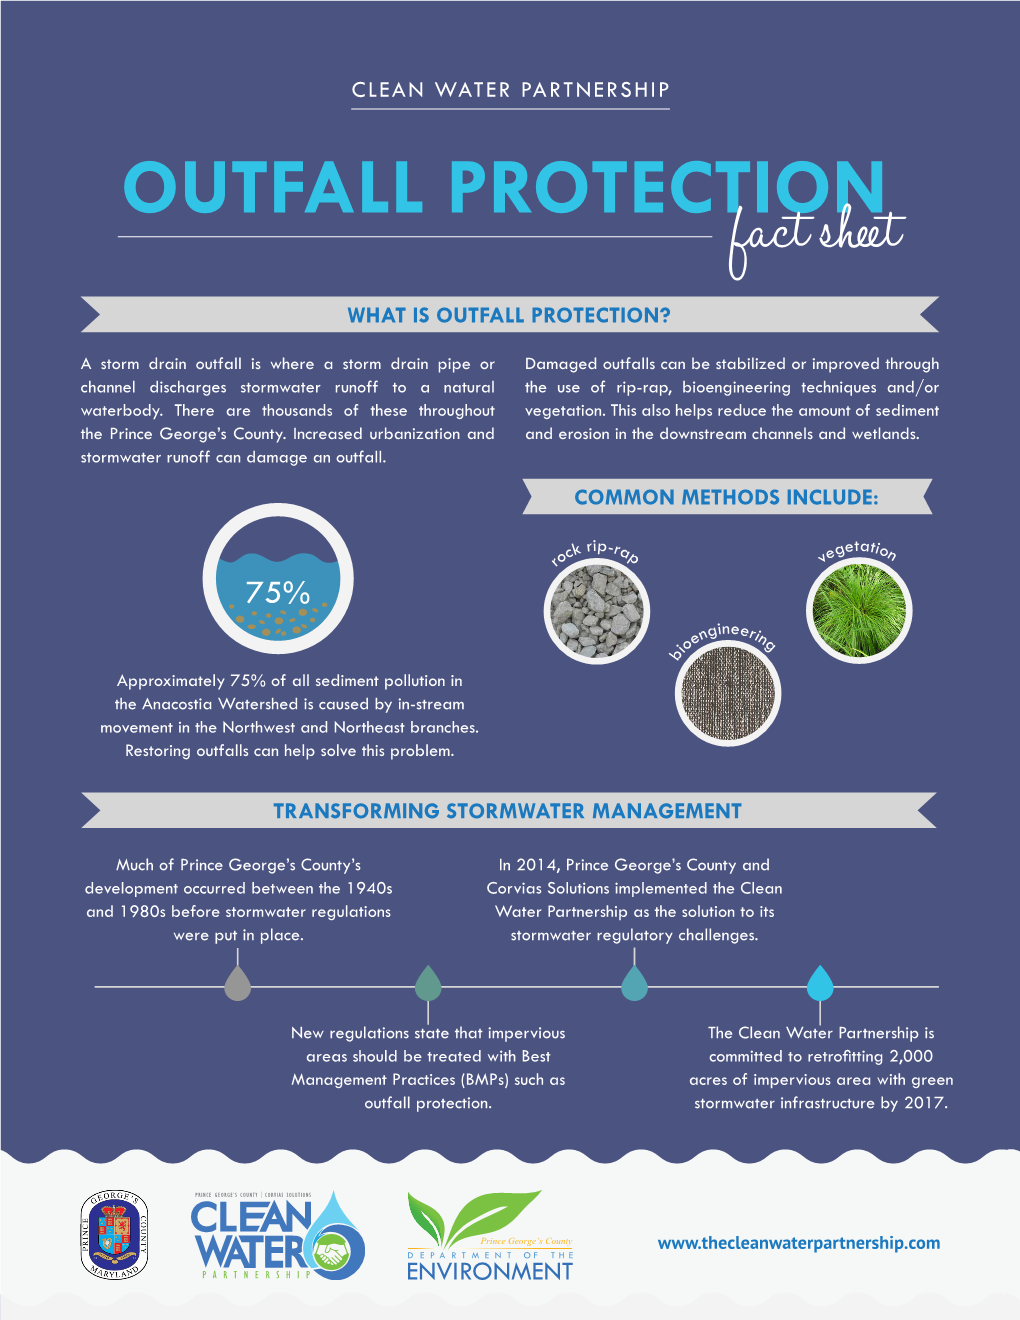 OUTFALL PROTECTION Fact Sheet WHAT IS OUTFALL PROTECTION?